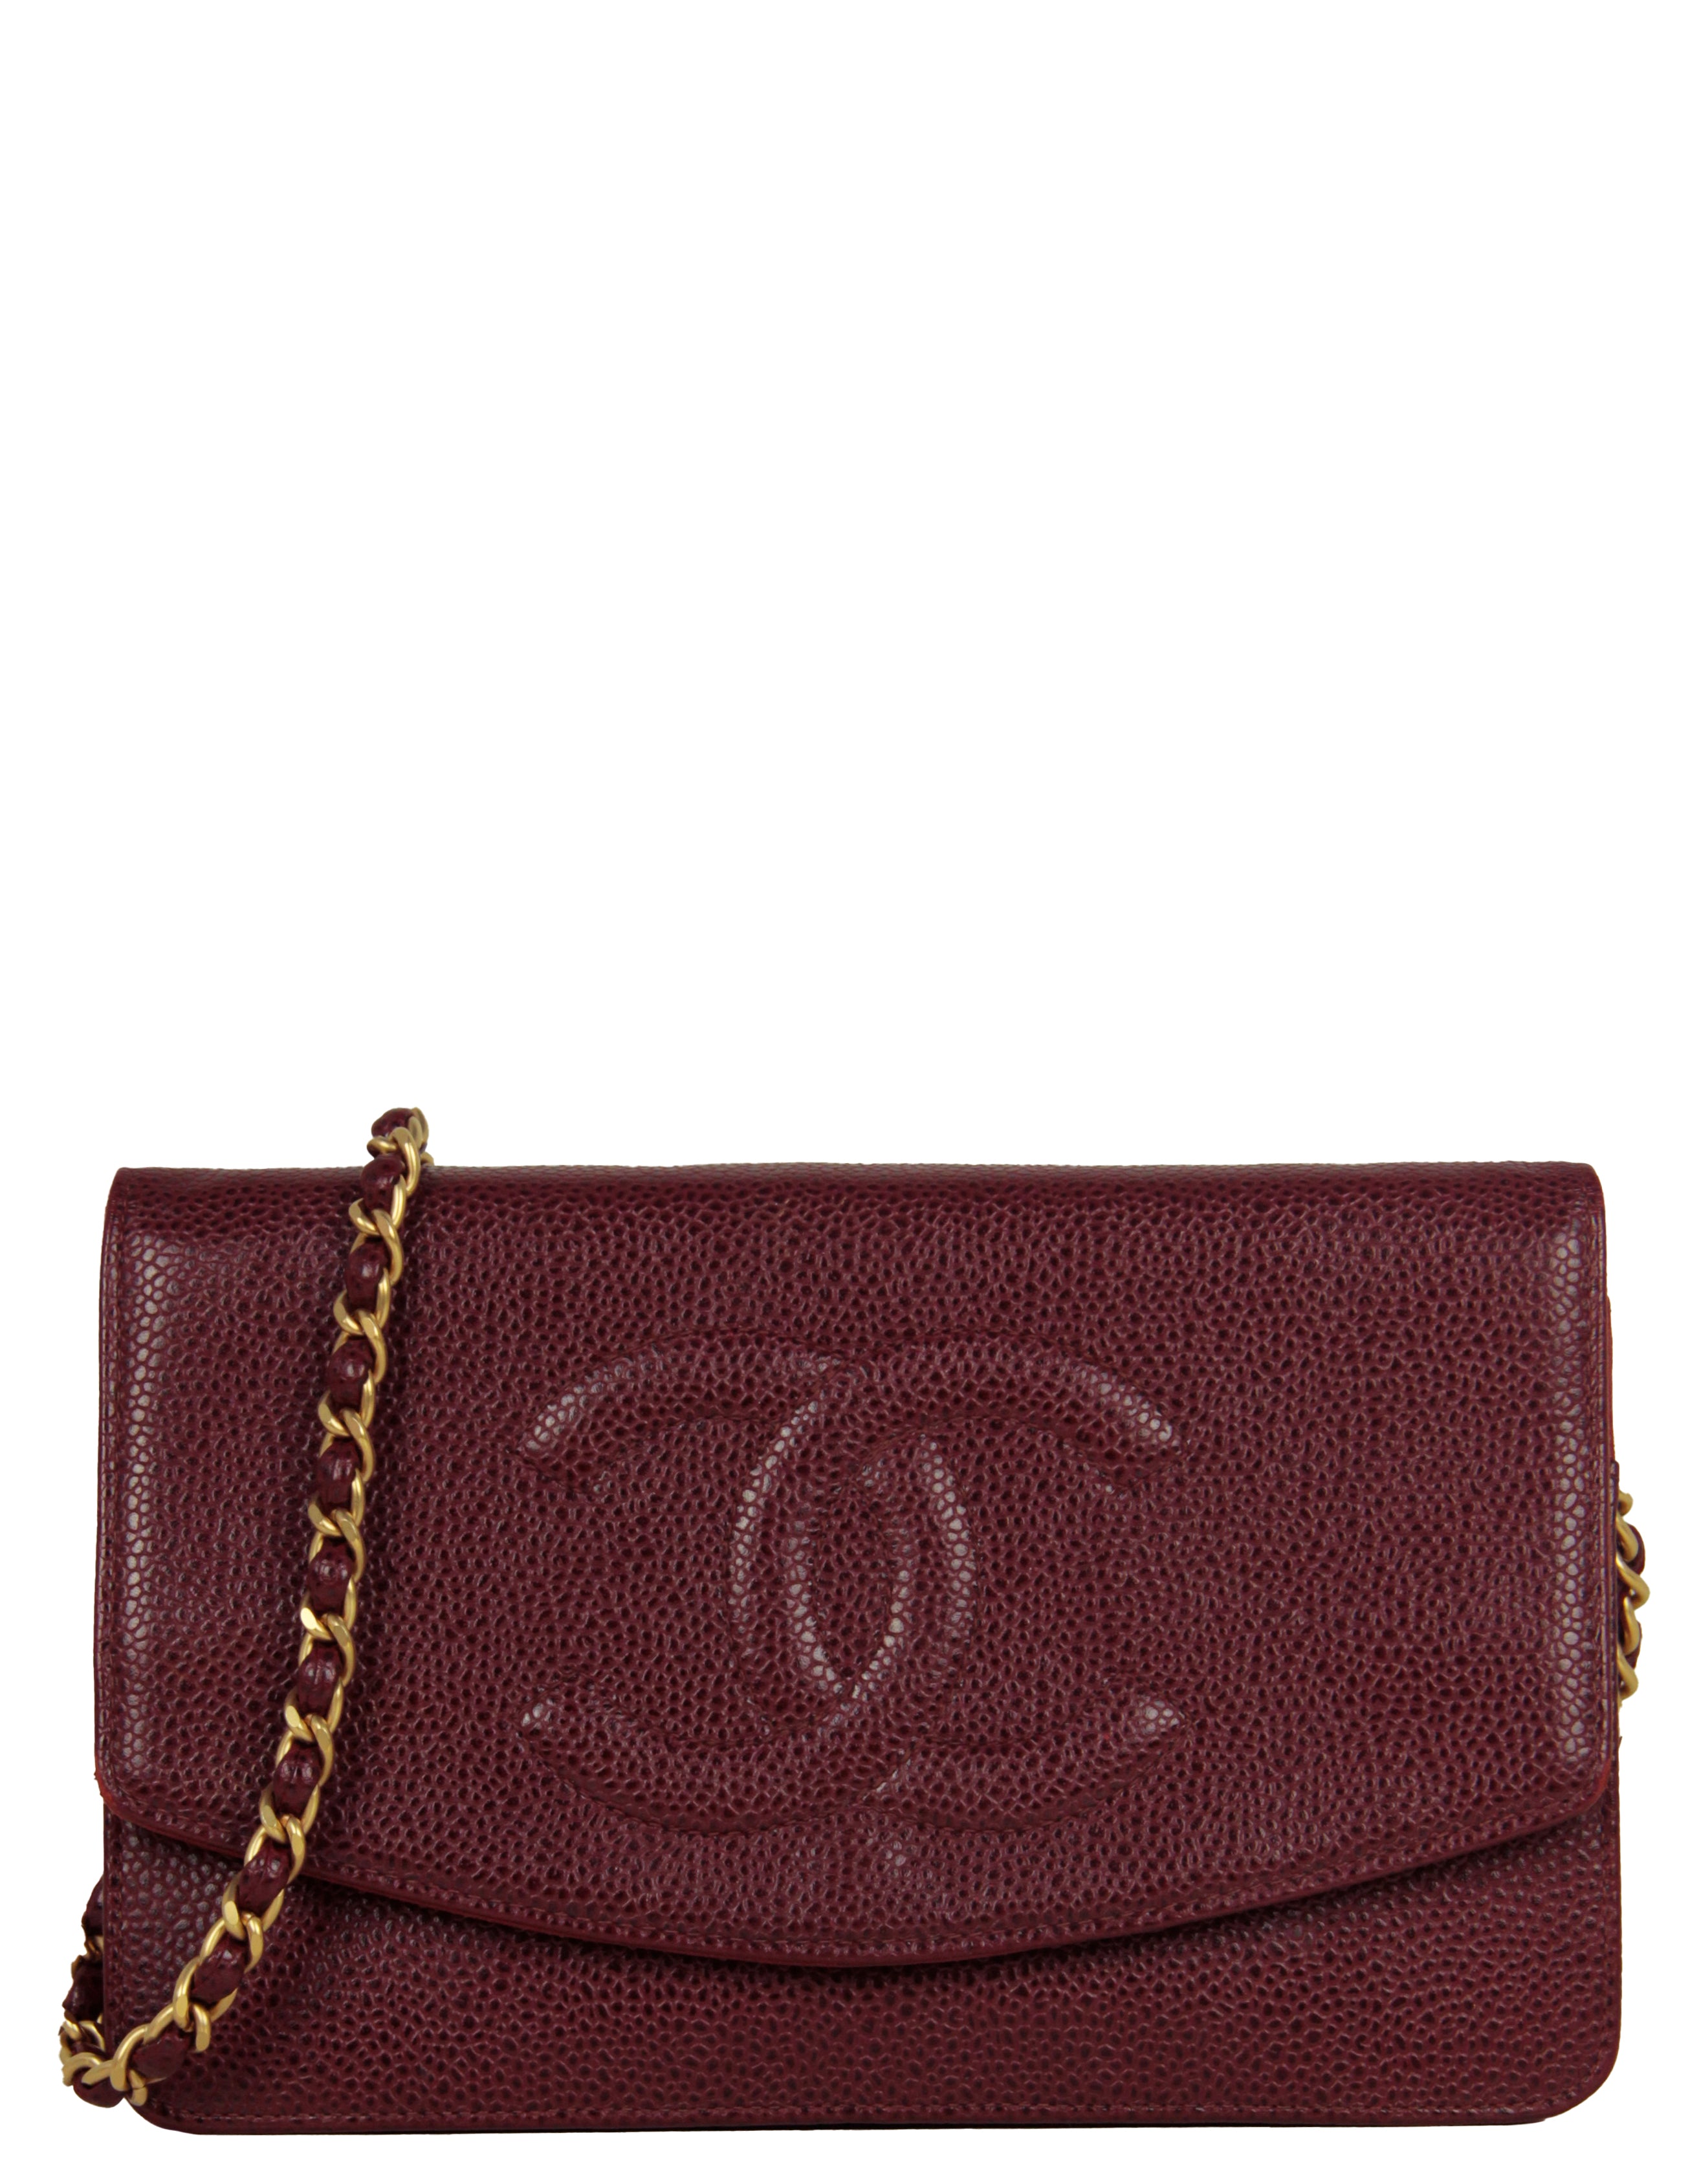 Auth Chanel Pink Lambskin Quilted Chain Around Phone Holder Crossbody Bag